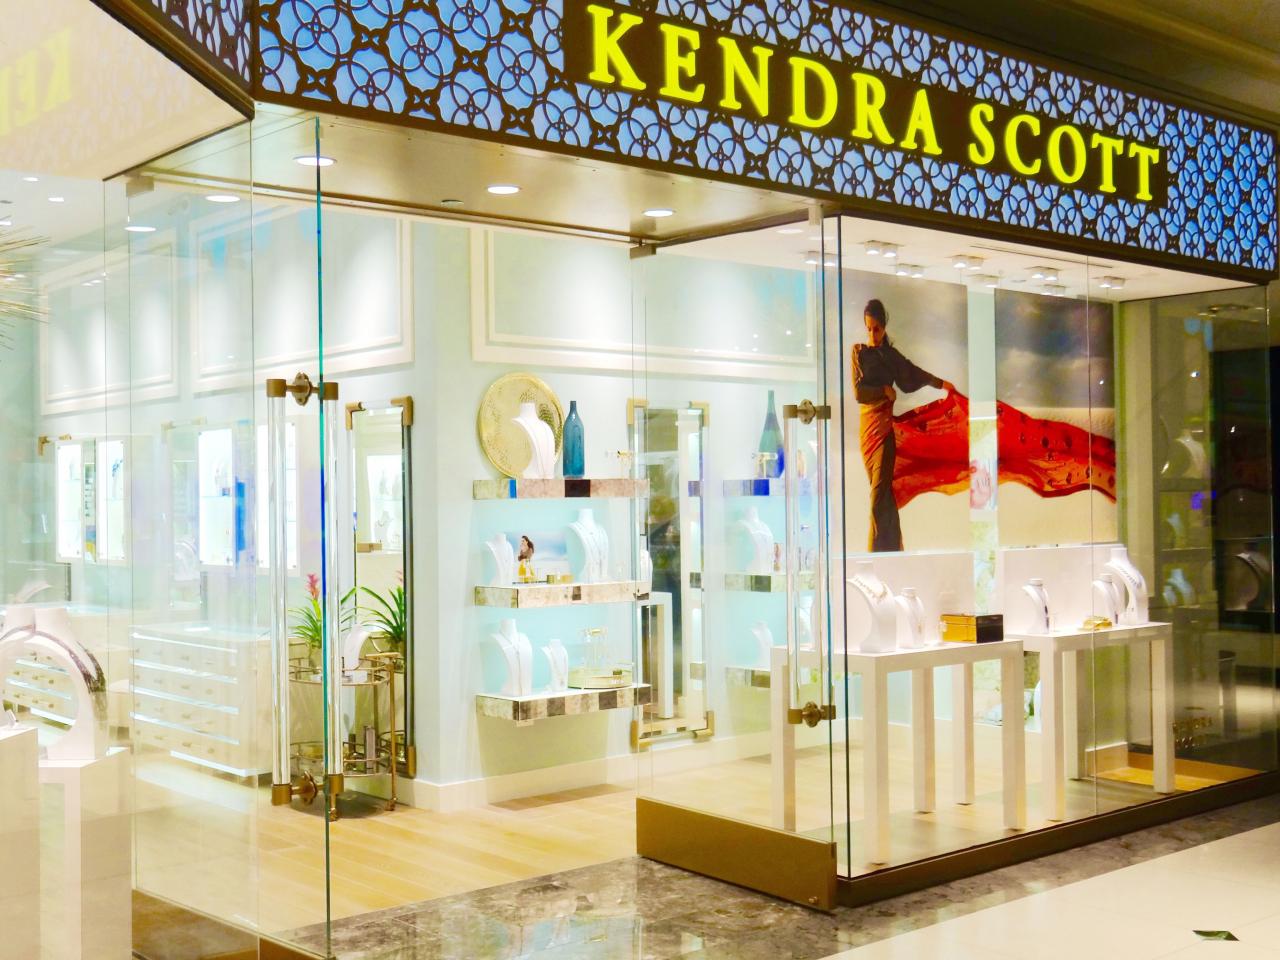 Kendra Scott Stores: An Oasis of Style and Personalized Shopping